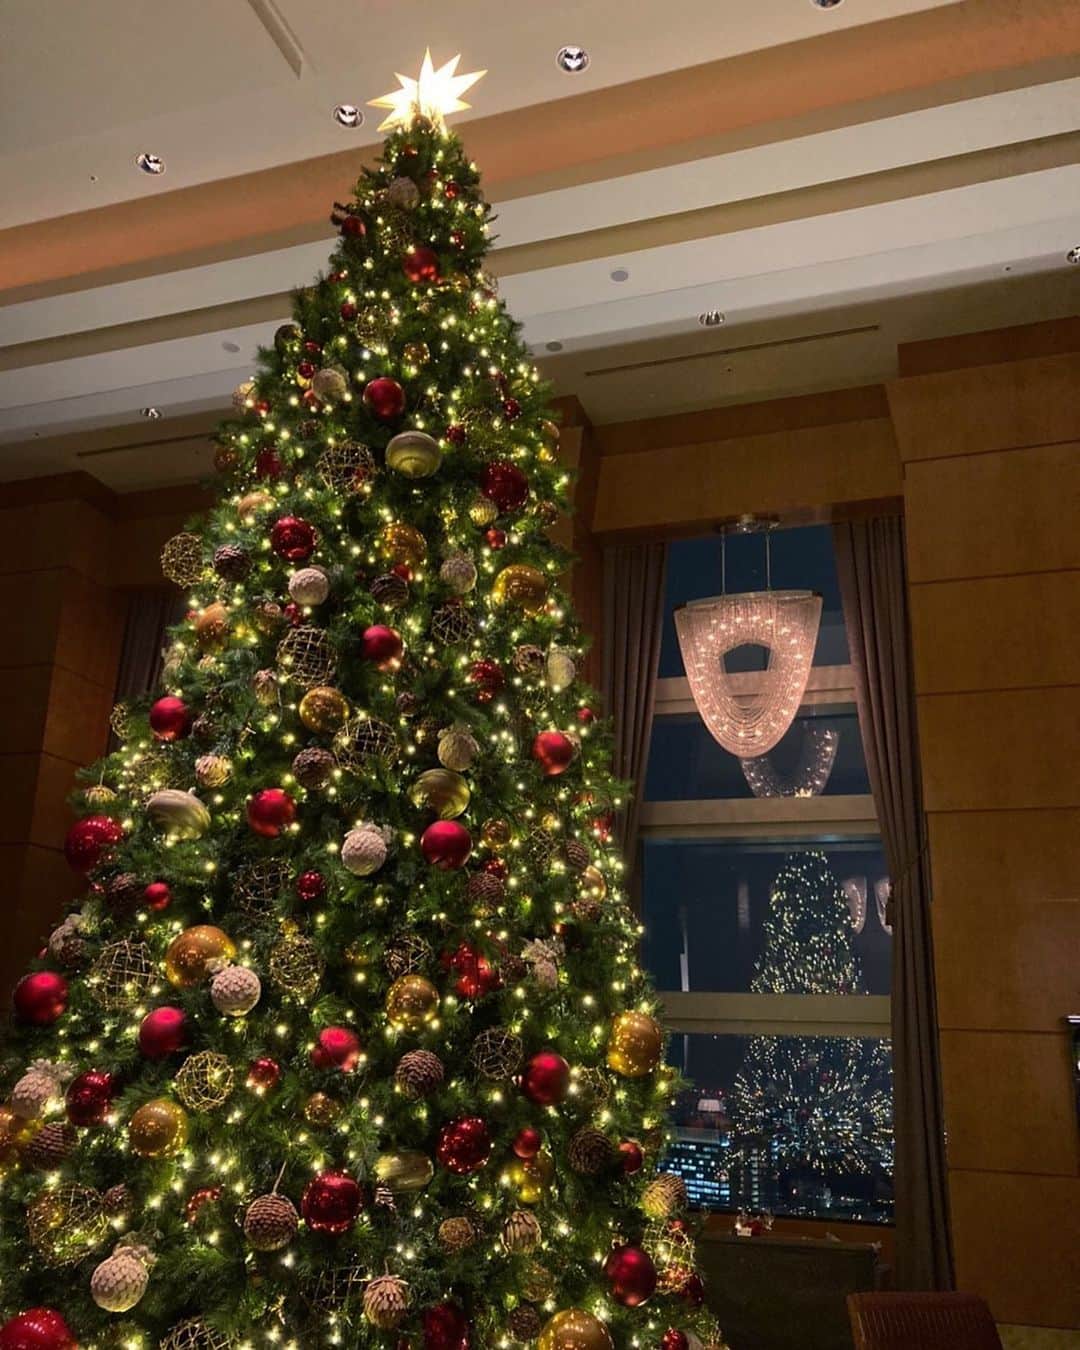 The Ritz-Carlton, Tokyoのインスタグラム：「本日、ザ・ロビーラウンジの大きな#クリスマスツリー が点灯いたしました🎄✨ 天井高8メートルの空間を彩るクラシックなクリスマスツリーの下で、是非フェスティブアフタヌーンティーをお楽しみください🍰 クリスマスツリーは、12月25日(金)までご覧いただけます😉  The festive season kicks off in The Lobby Lounge today – with our special #Christmas Tree lights turned on🎄 Enjoy views of our classic Christmas tree while tucking into a Festive Afternoon Tea spread☕️ The Christmas Tree is on display until December 25💚 #RitzCarltonTokyo #RCMemories」